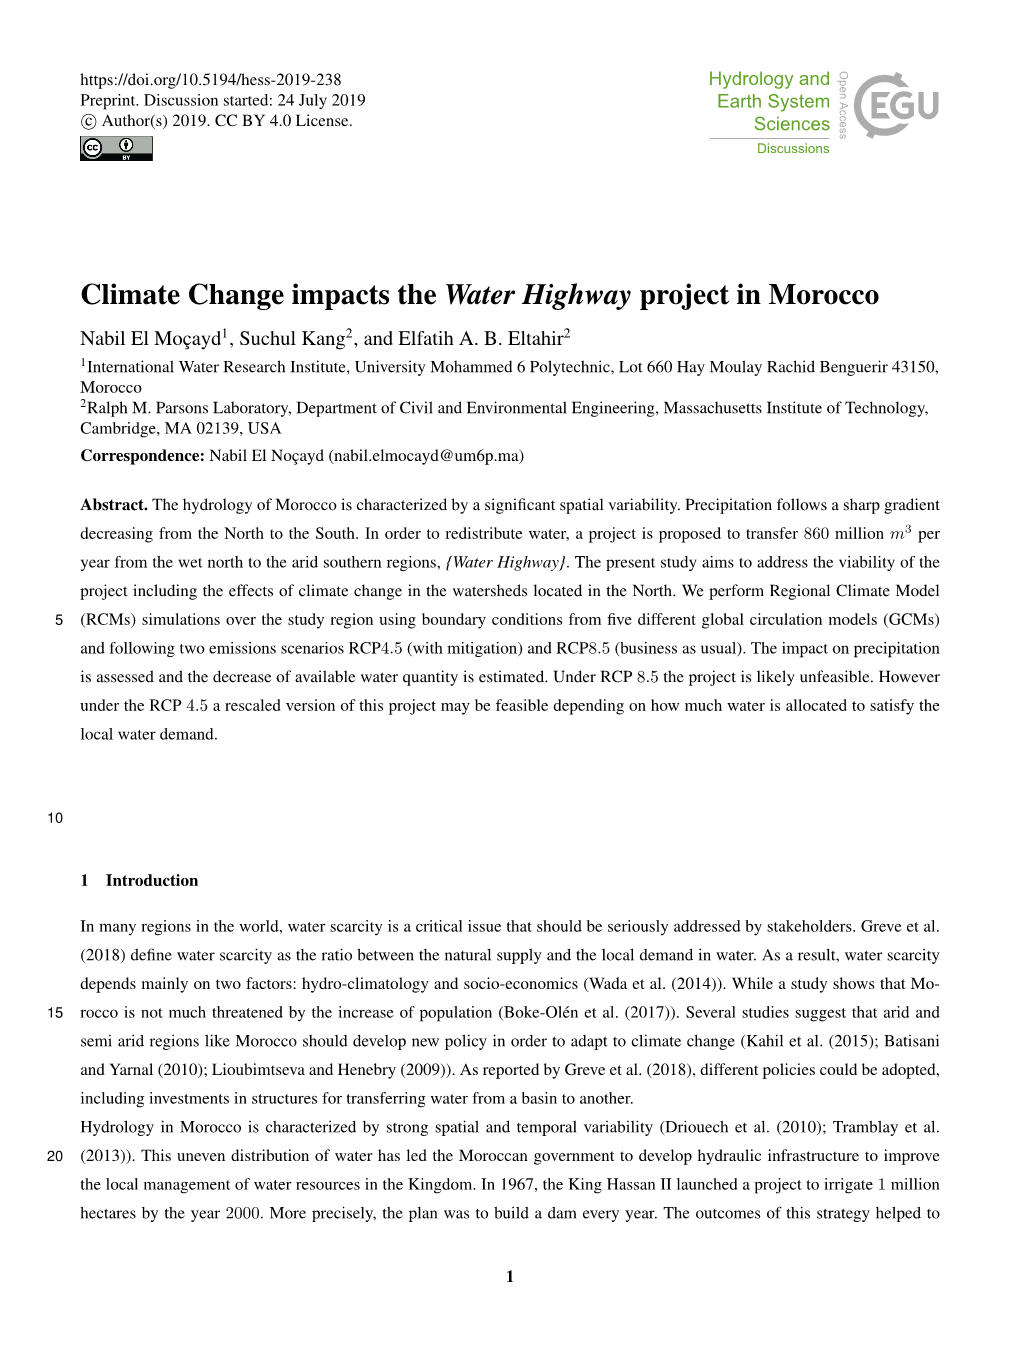 Climate Change Impacts the Water Highway Project in Morocco Nabil El Moçayd1, Suchul Kang2, and Elfatih A